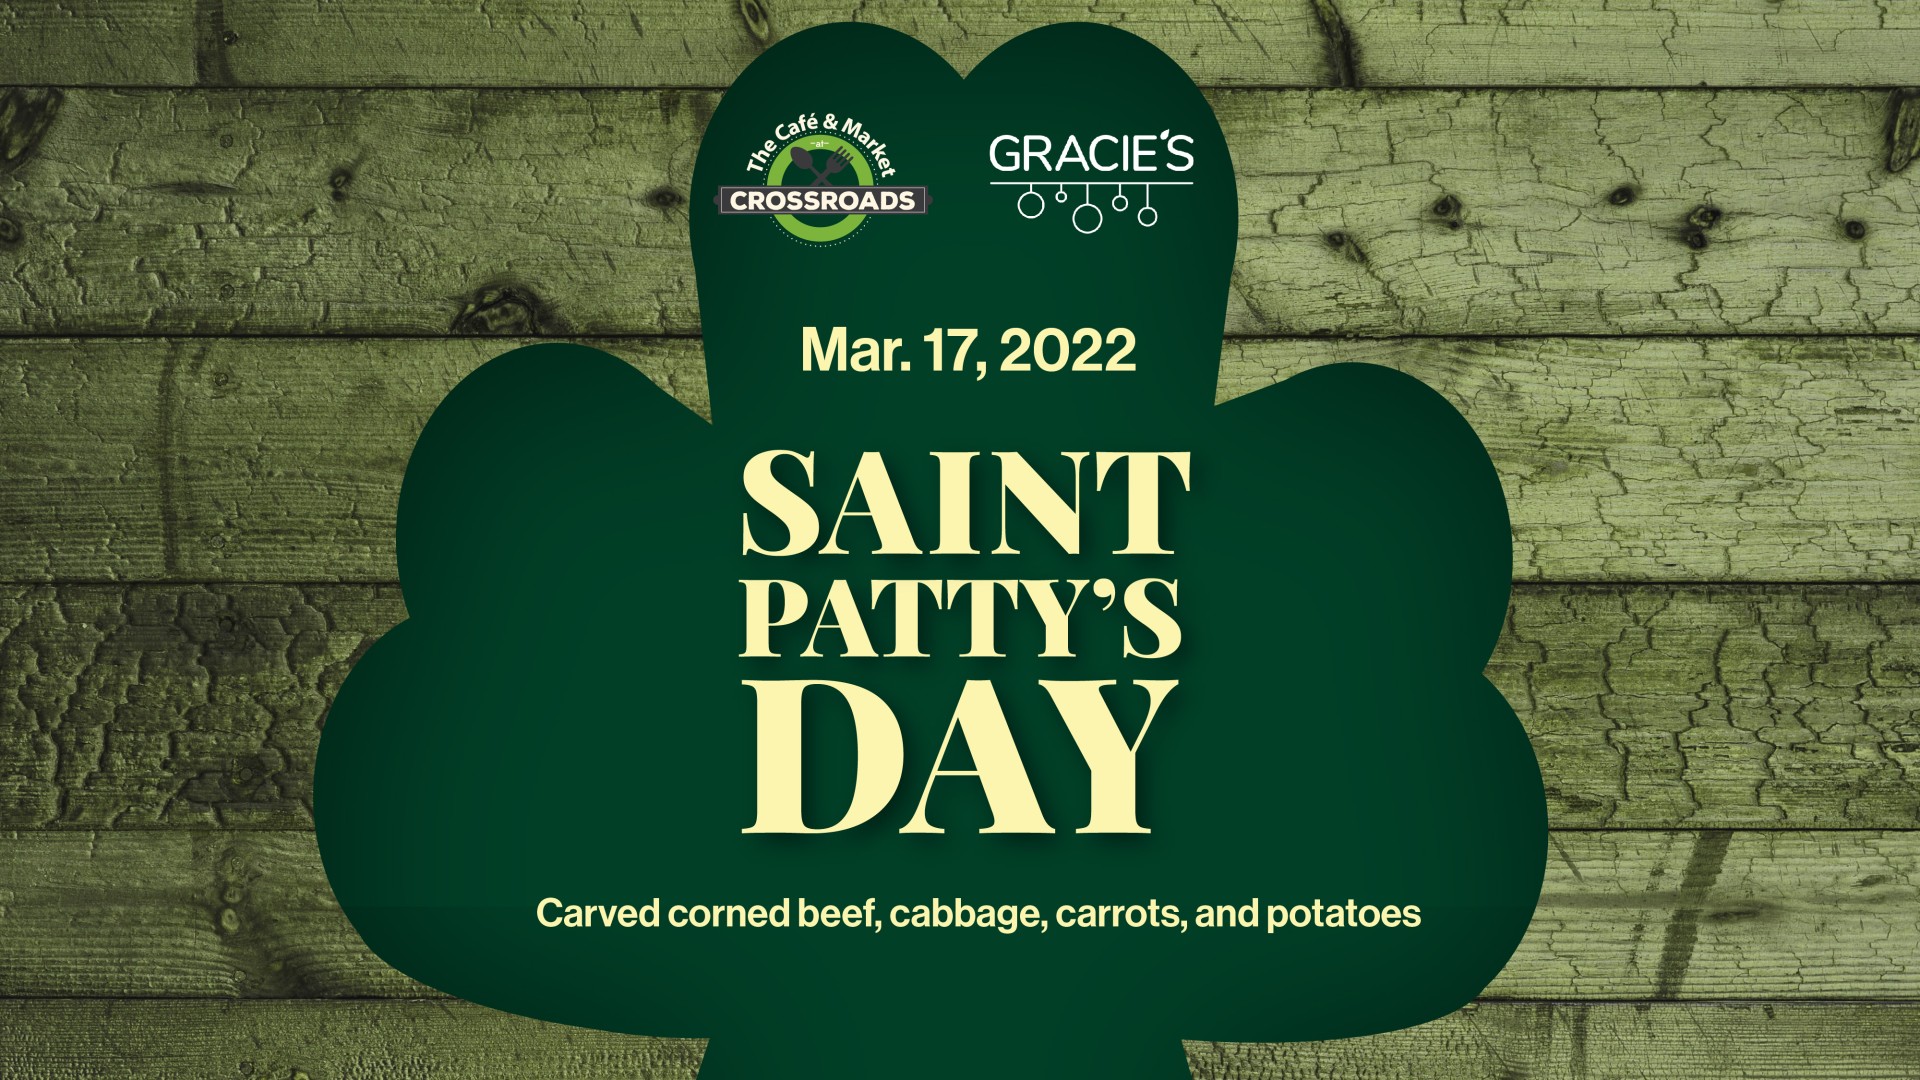 Saint Patty's Day at The Cafe and Market at Crossroads and Gracie's 